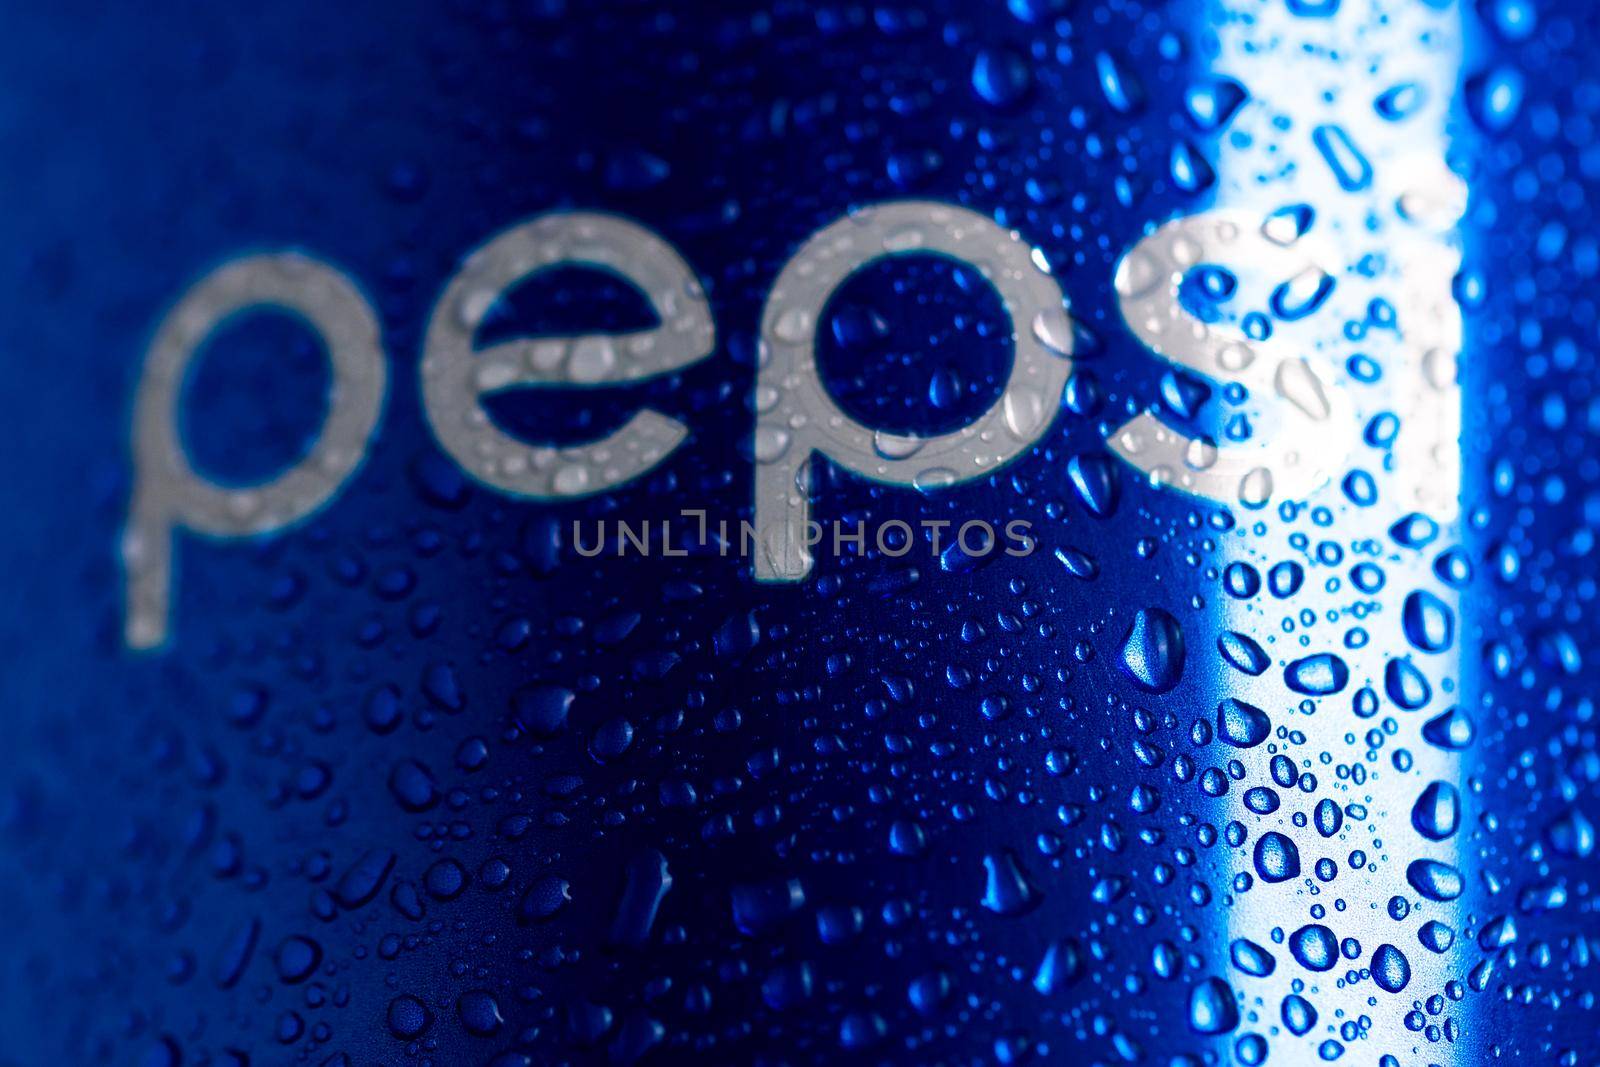 Detail of classic Pepsi can with water droplets on black background. Studio shot in Bucharest, Romania, 2021 by vladispas